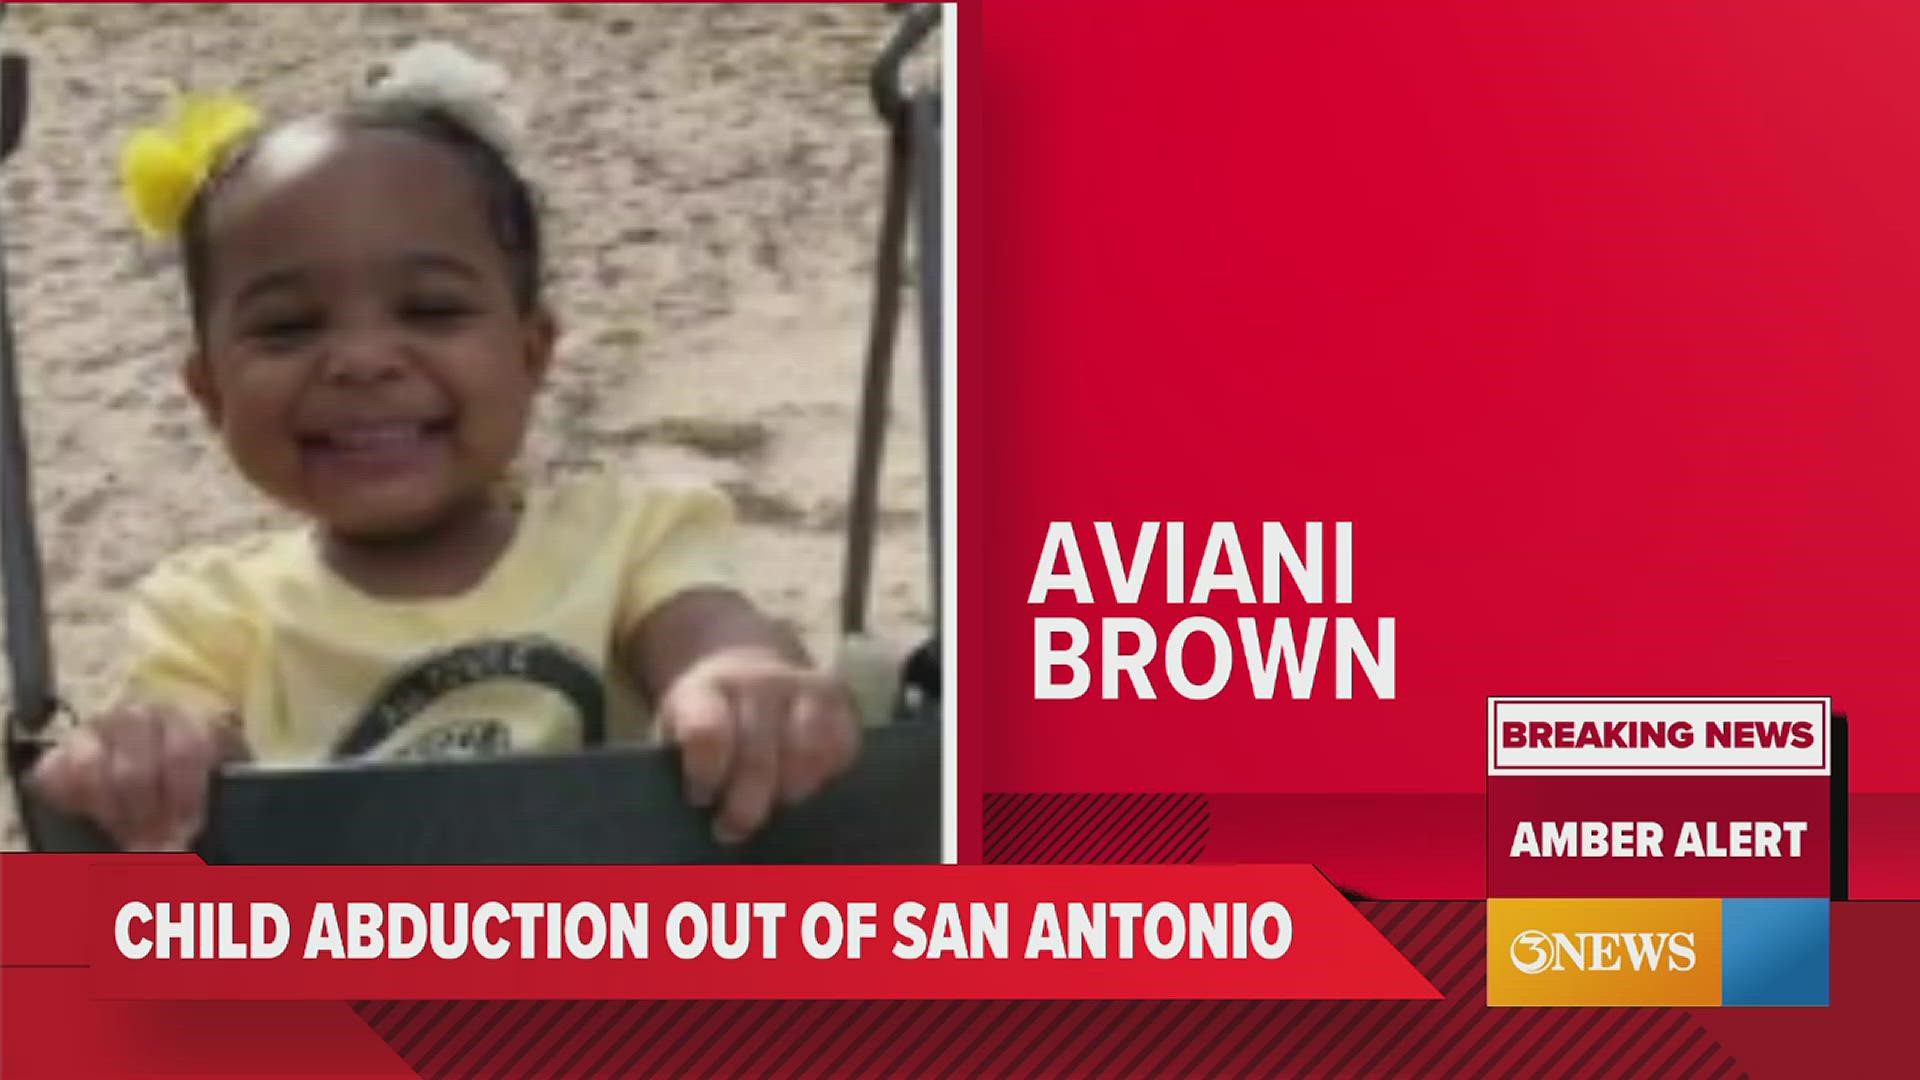 Aviani Brown was last seen wearing a white beanie, black jacket, and gray onsie with the word 'unity' on it. Police say 20-year-old Jaeshaun Brown took her.